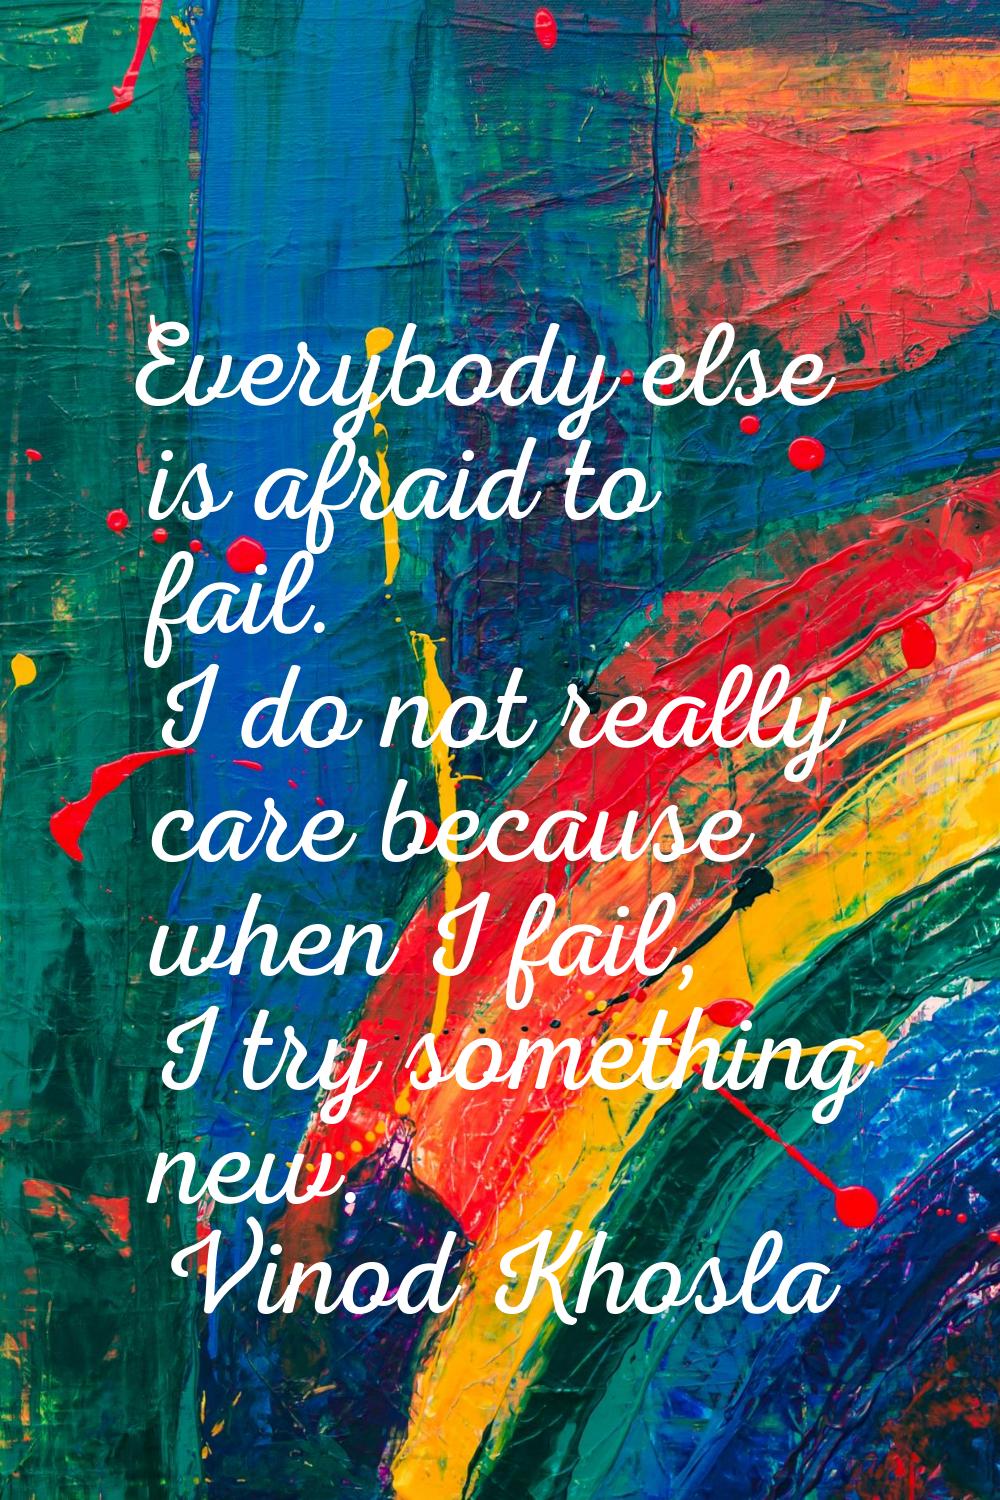 Everybody else is afraid to fail. I do not really care because when I fail, I try something new.